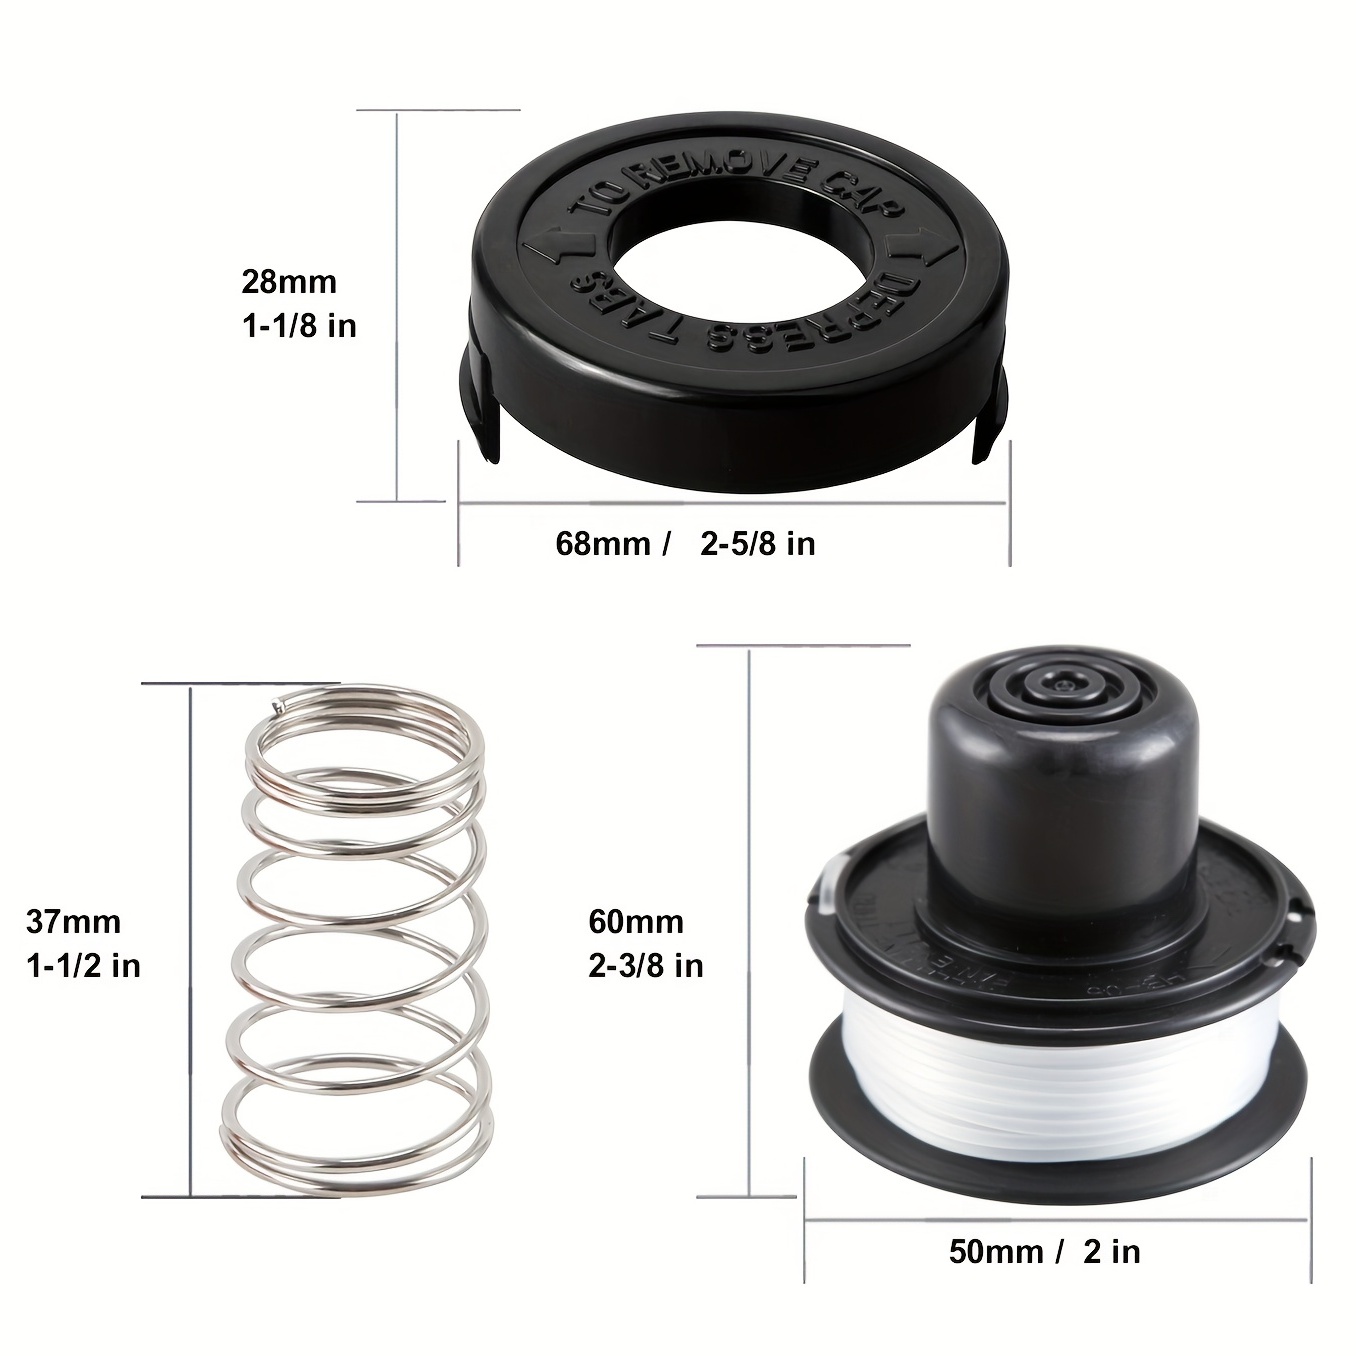 New RS-136 Replacement String Trimmer Spool Line For BLACK+DECKER ST4000  ST4500 (1 Spool